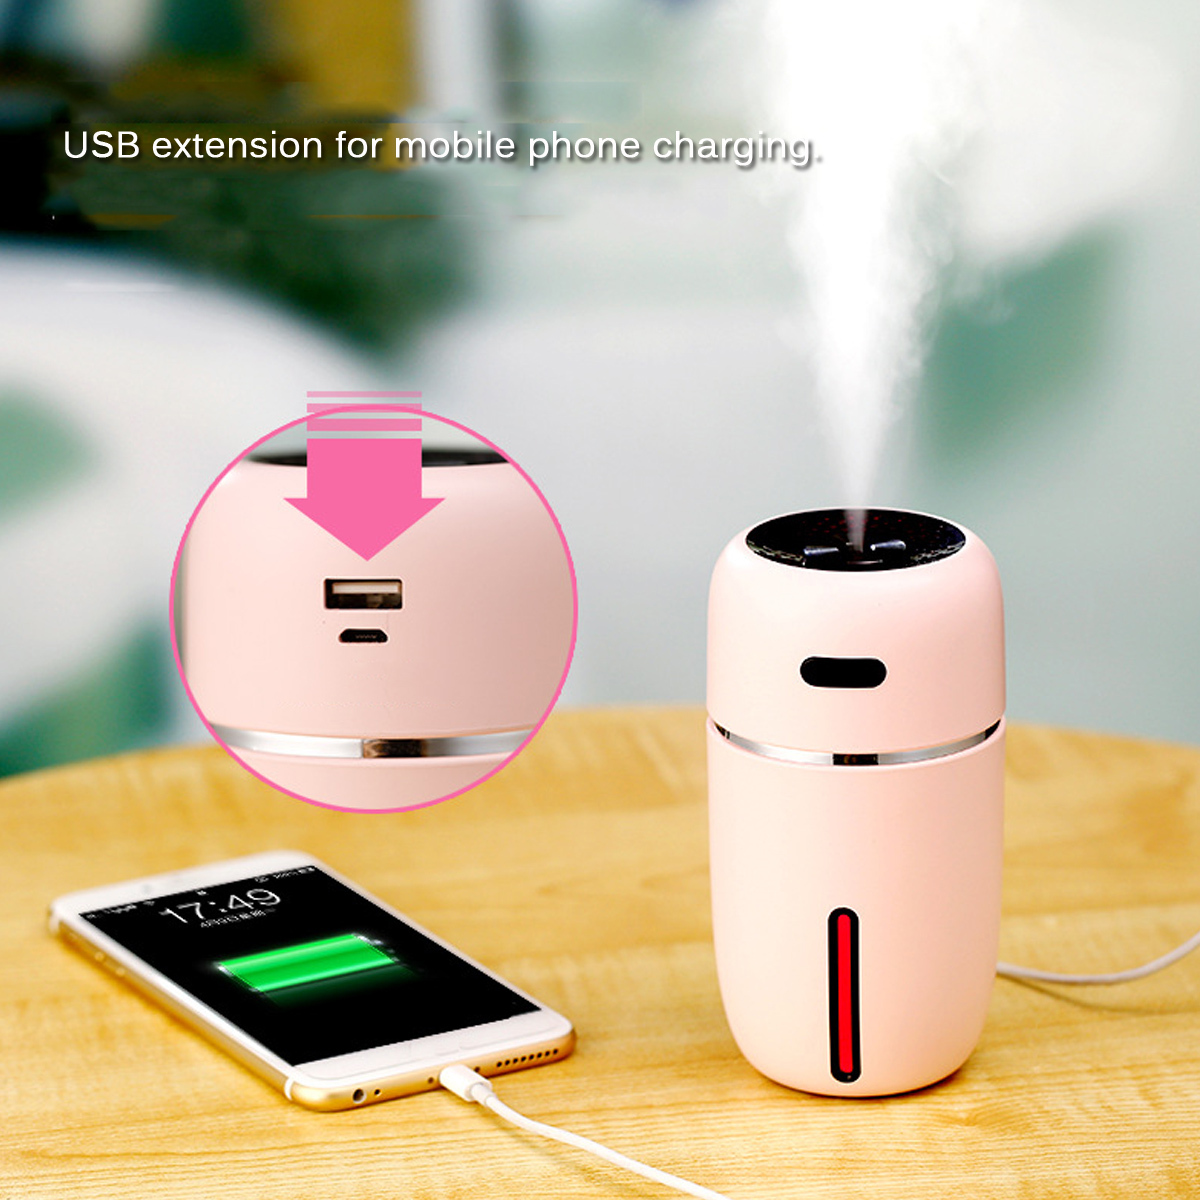 200ml-Electric-Air-Humidifier-Diffuser-Aroma-Mist-Purifier-LED-Light-USB-Charging-Power-Bank-for-Por-1809965-4